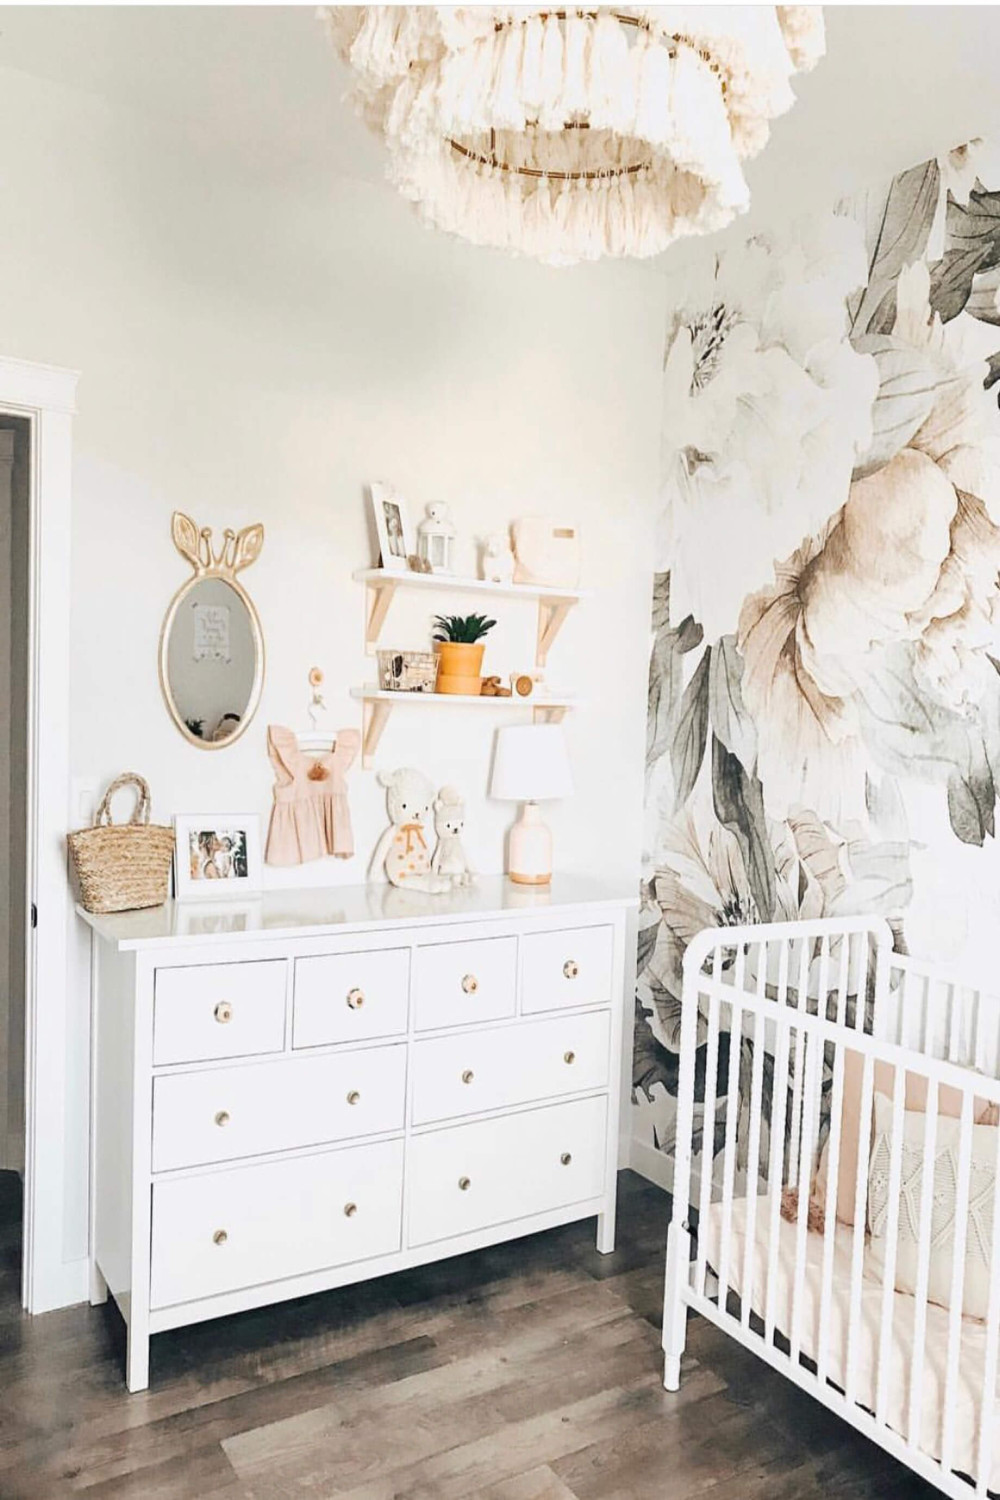 Our Baby Girl Nursery Decor Inspiration - M Loves M